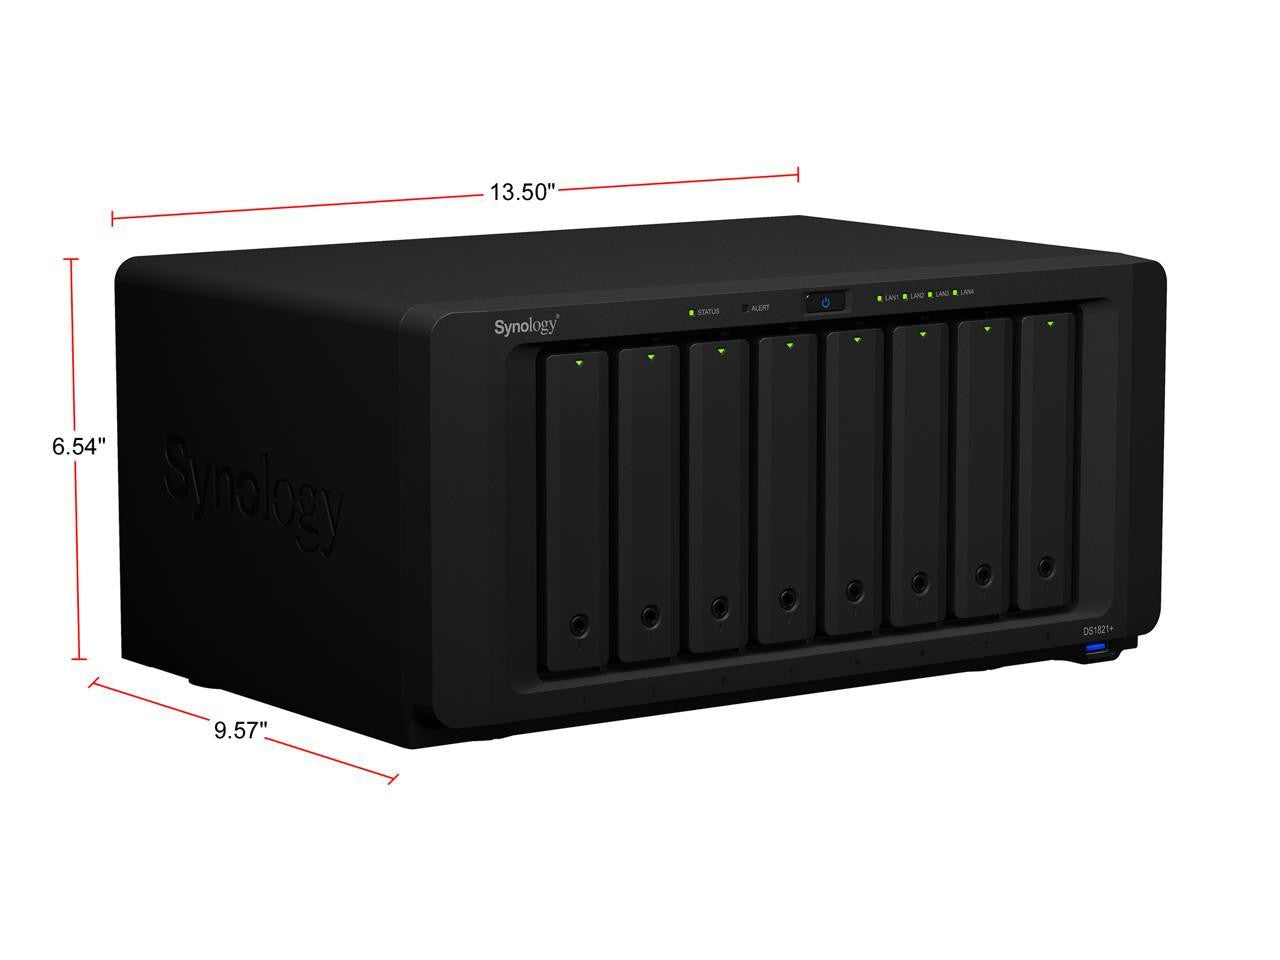 Synology DS1821+ 8-BAY DiskStation with 16GB Synology RAM and 112TB (8x14TB) Western Digital RED PLUS Drives Fully Assembled and Tested